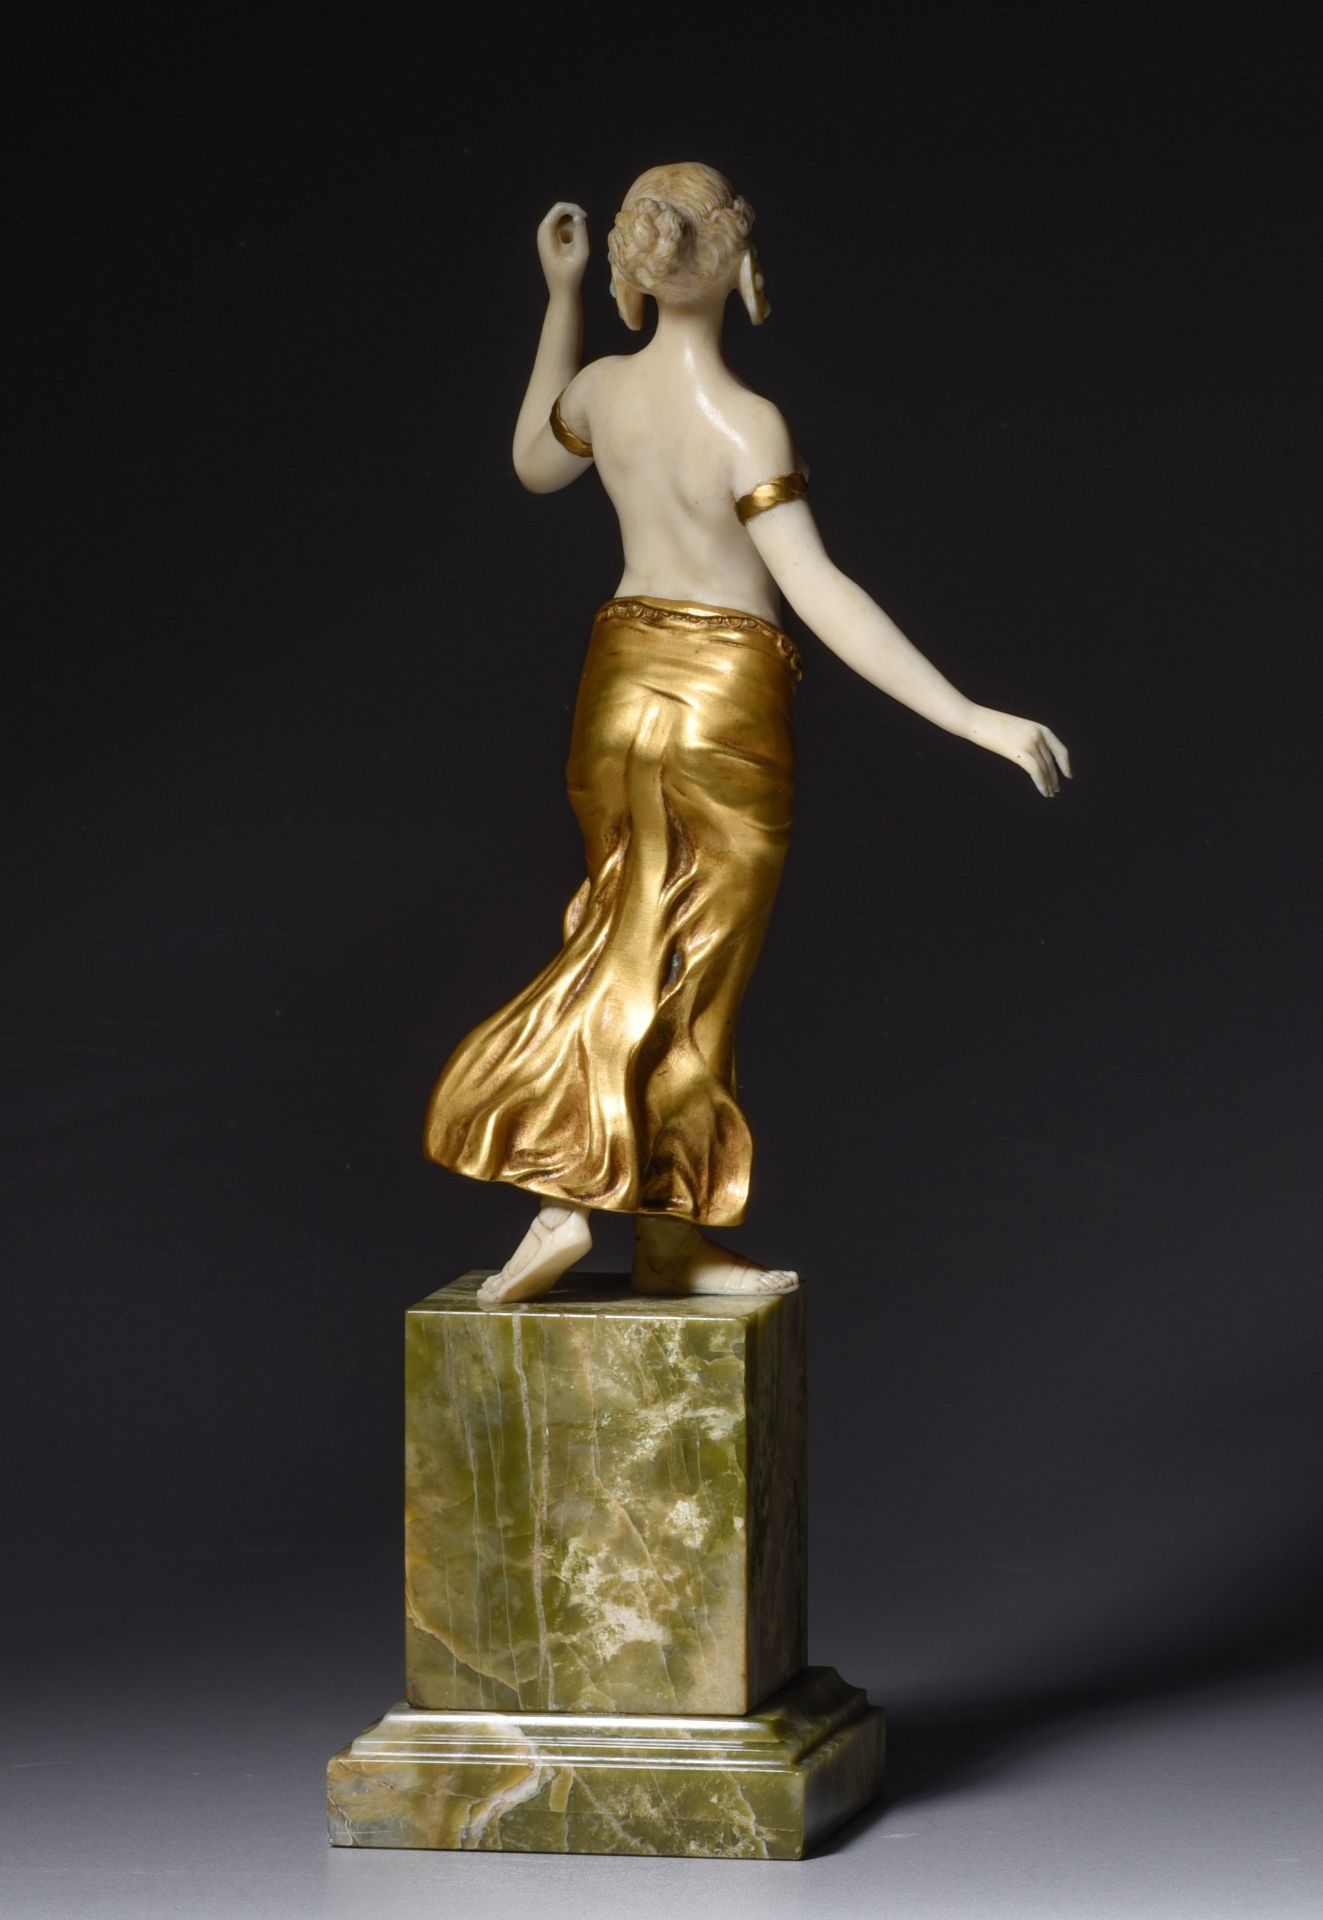 Chryselephantine statuette of a dancing Salomé, 1910-1920, H 25,2 cm - 1075 g (+) - Image 4 of 5